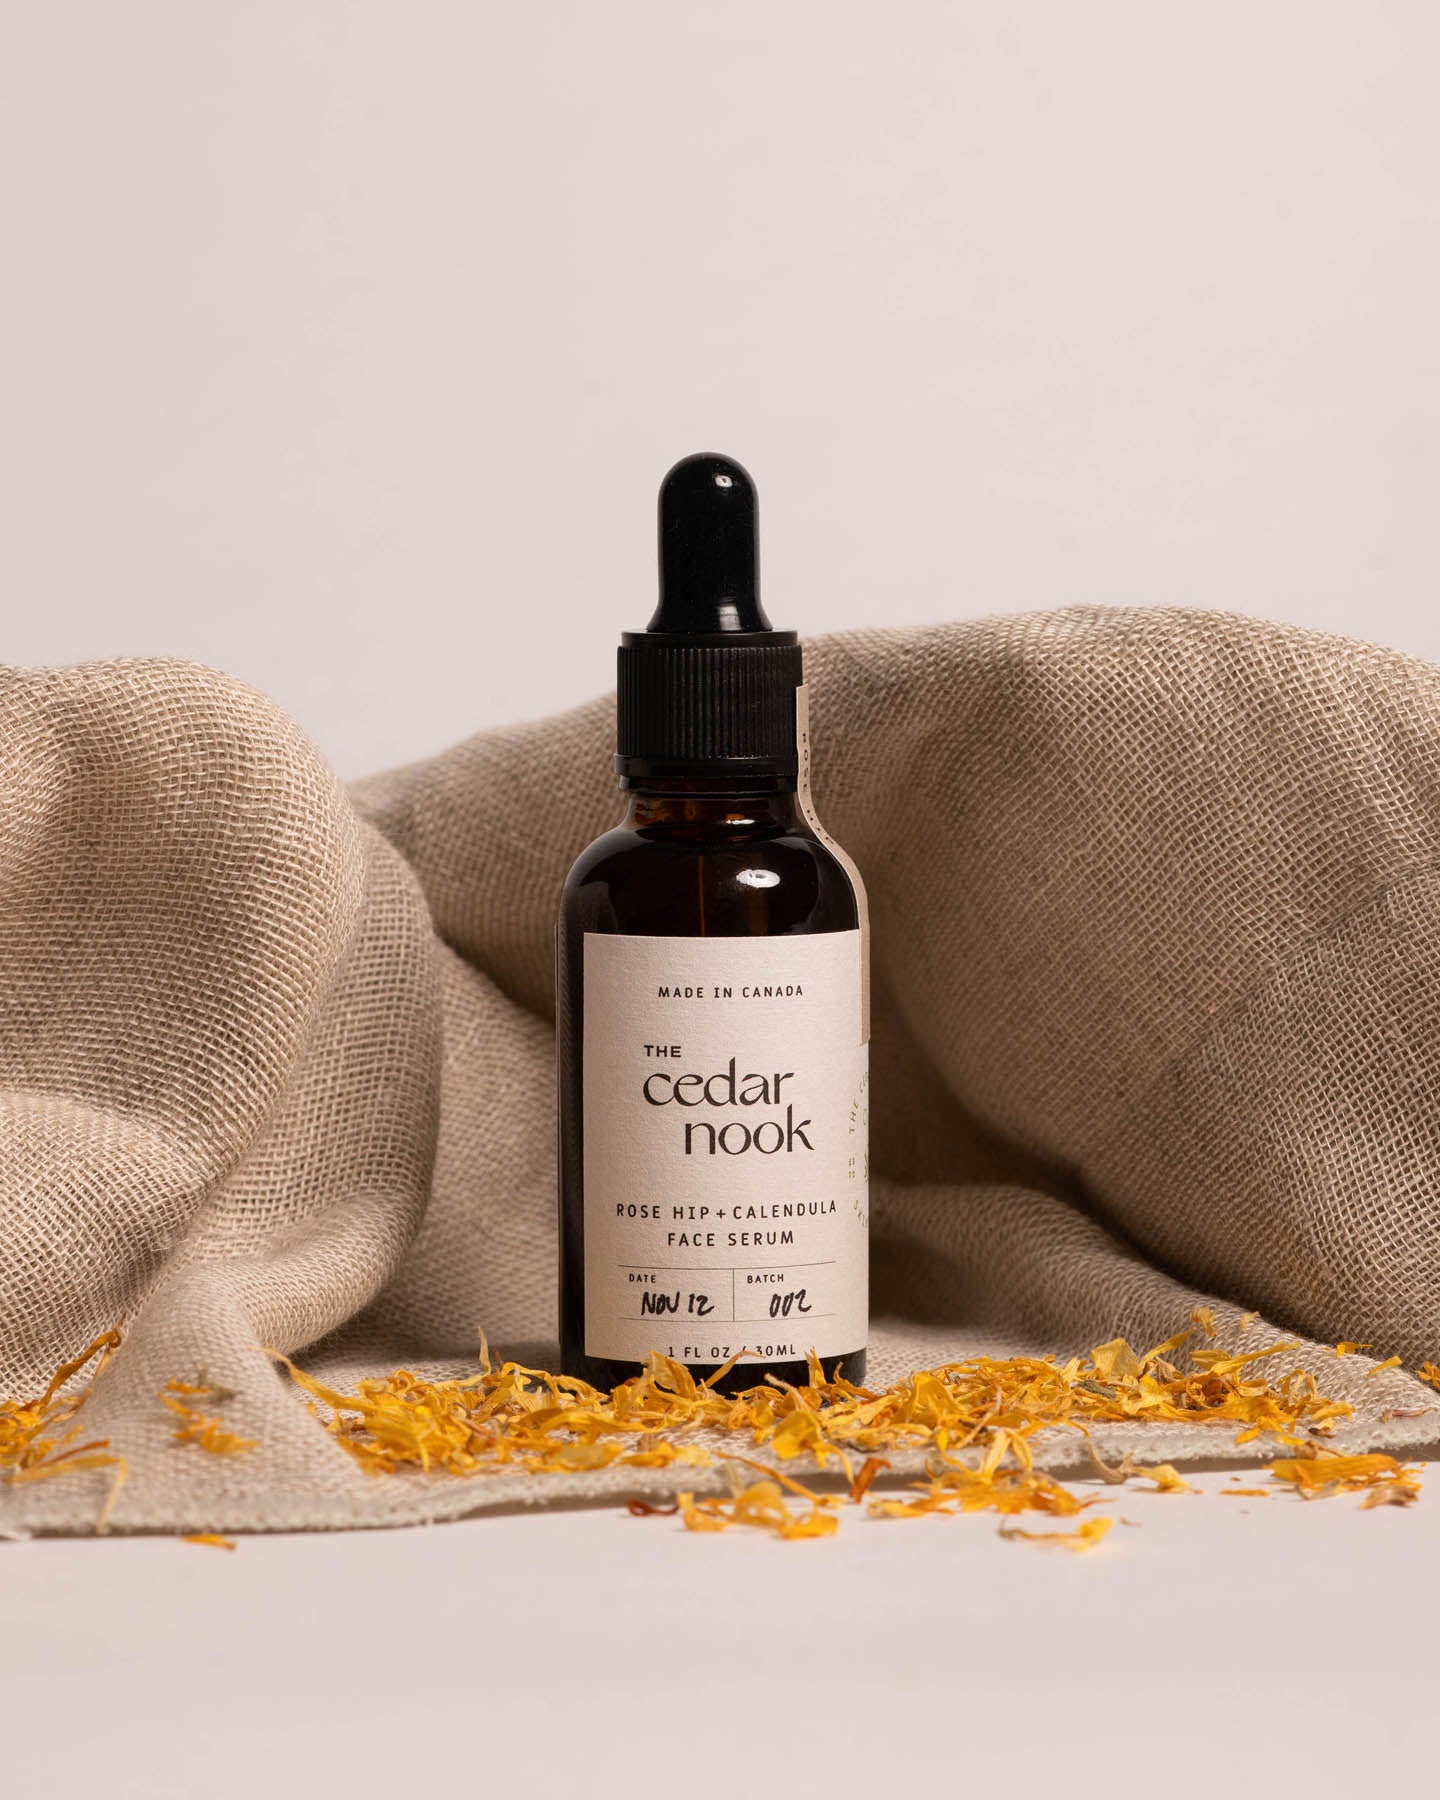 Rose Hip and Calendula Face Serum in a 1 oz amber glass bottle, standing in front of a burlap sack and surrounded by dried Calendula